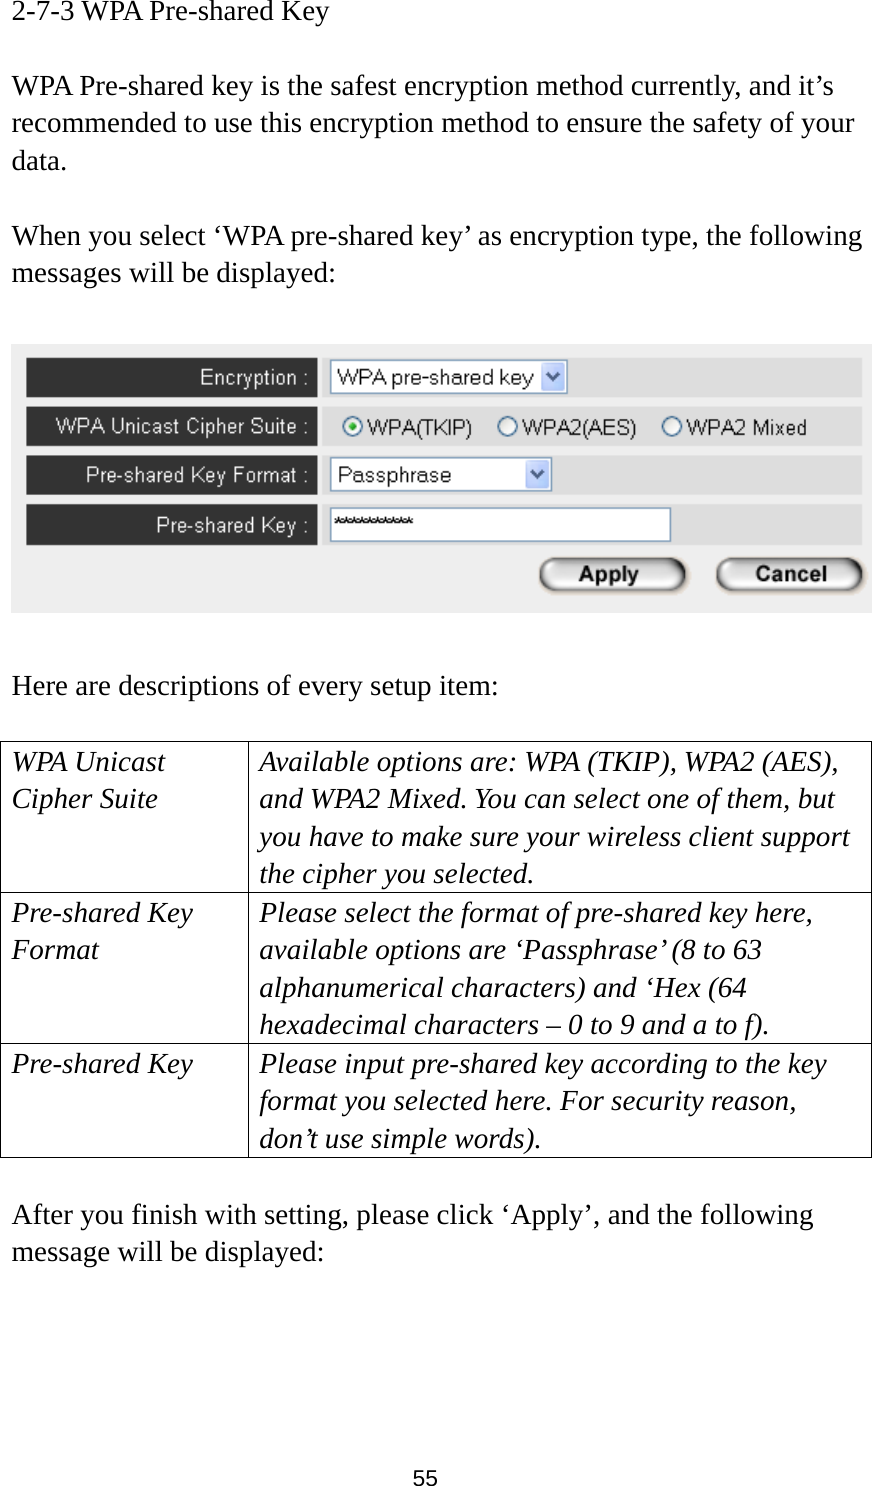 55 2-7-3 WPA Pre-shared Key  WPA Pre-shared key is the safest encryption method currently, and it’s recommended to use this encryption method to ensure the safety of your data.  When you select ‘WPA pre-shared key’ as encryption type, the following messages will be displayed:    Here are descriptions of every setup item:  WPA Unicast Cipher Suite  Available options are: WPA (TKIP), WPA2 (AES), and WPA2 Mixed. You can select one of them, but you have to make sure your wireless client support the cipher you selected. Pre-shared Key Format Please select the format of pre-shared key here, available options are ‘Passphrase’ (8 to 63 alphanumerical characters) and ‘Hex (64 hexadecimal characters – 0 to 9 and a to f). Pre-shared Key Please input pre-shared key according to the key format you selected here. For security reason, don’t use simple words).  After you finish with setting, please click ‘Apply’, and the following message will be displayed:  